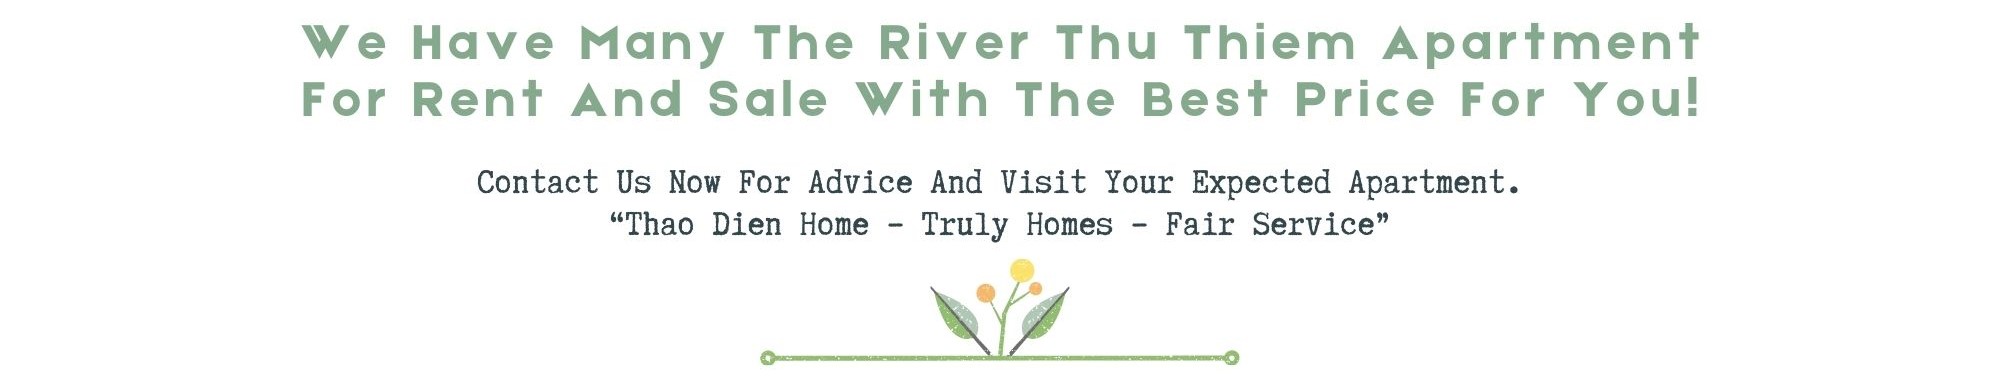 We Have Many The River Thu Thiem Apartment For Rent And Sale With The Best Price For You Contact Us Now For Advice And Visit Your Expected Apartment. Thao Dien Home – Truly Homes – Fair Service - Panoramic Saigon River Views! 3BR Furnished Apartment at The River Thu Thiem